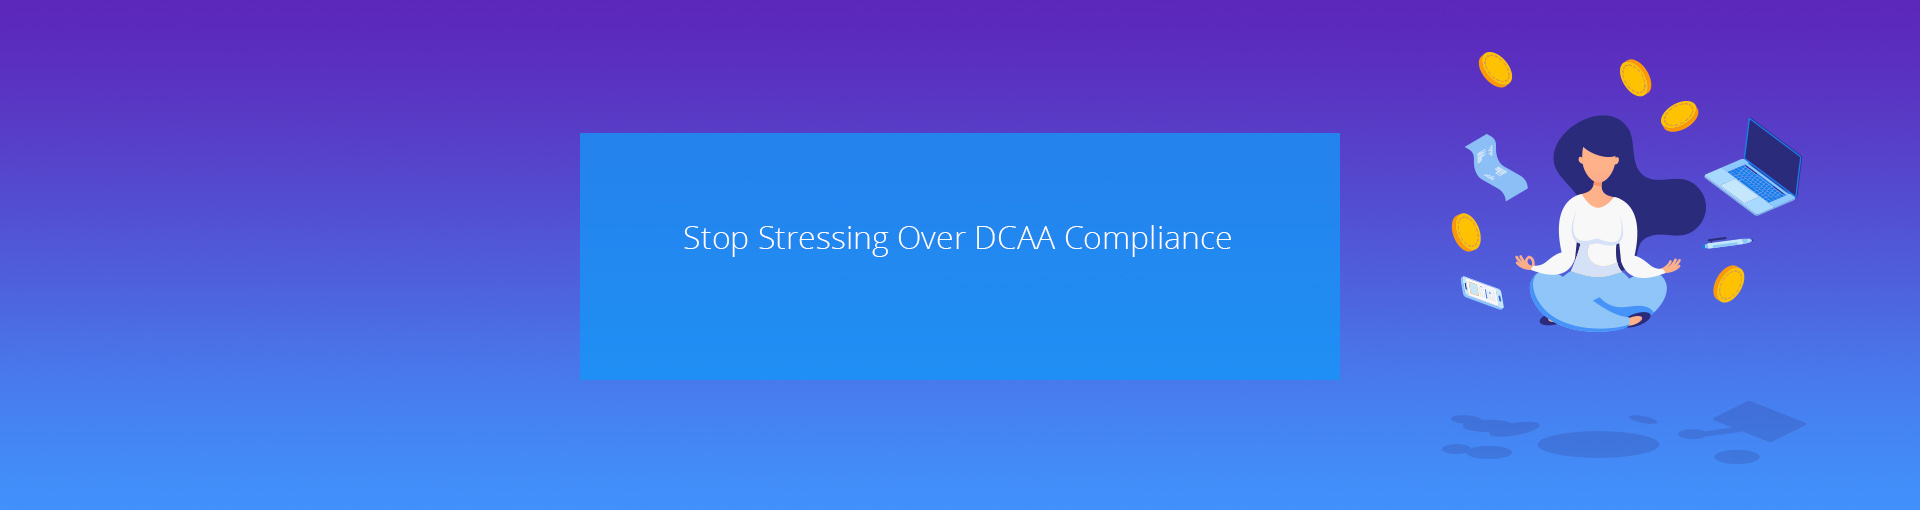 Stop Stressing Over DCAA Compliance